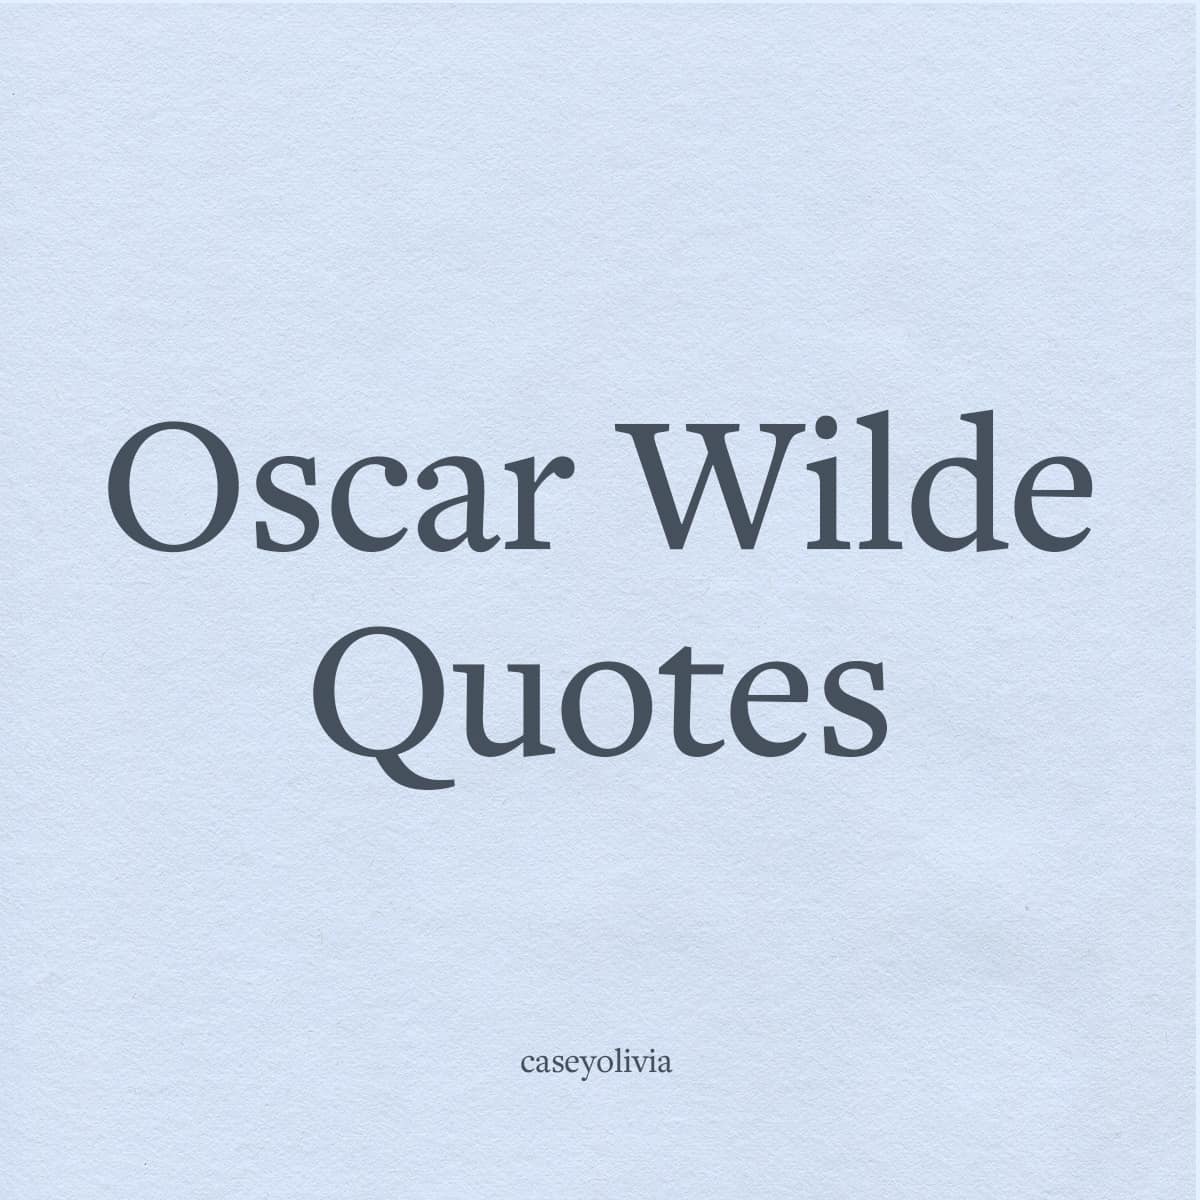 list of the best oscar wilde quotes and images